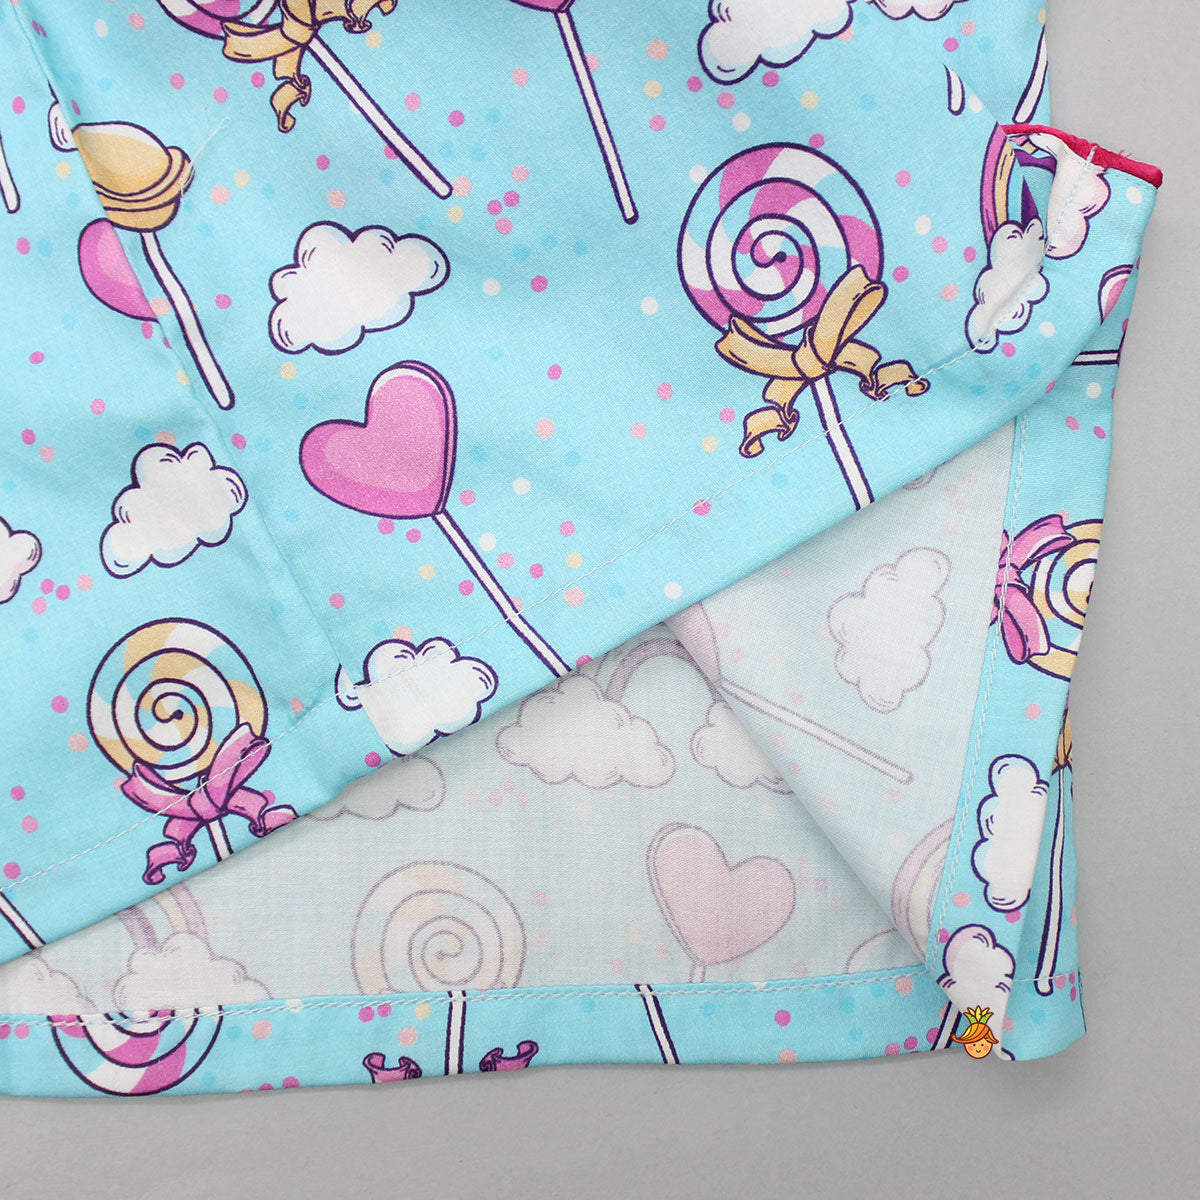 Pre Order: Candy Printed Pure Cotton Blue Sleepwear